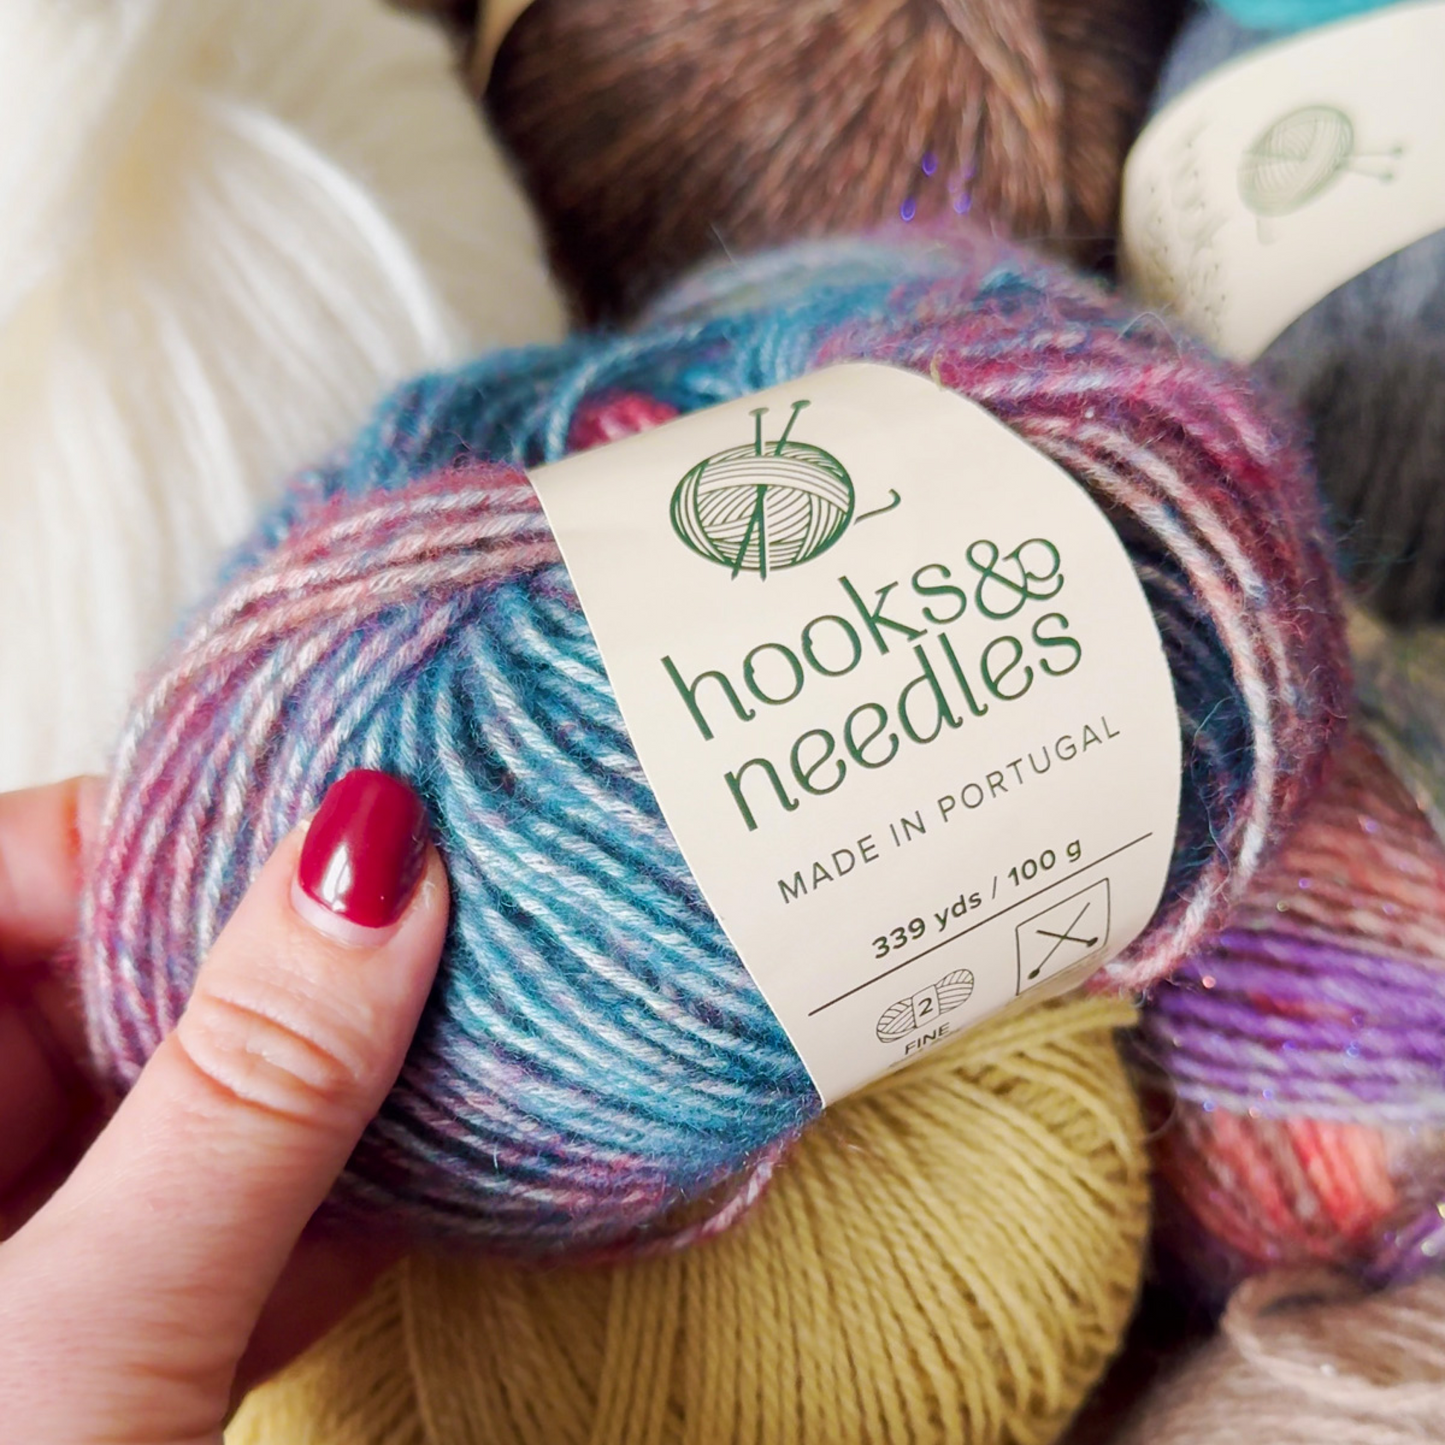 A person holding a skein of multicolored yarn with the label "12-Month-Prepaid Hooks & Needles Subscription Box #29, made in Portugal.